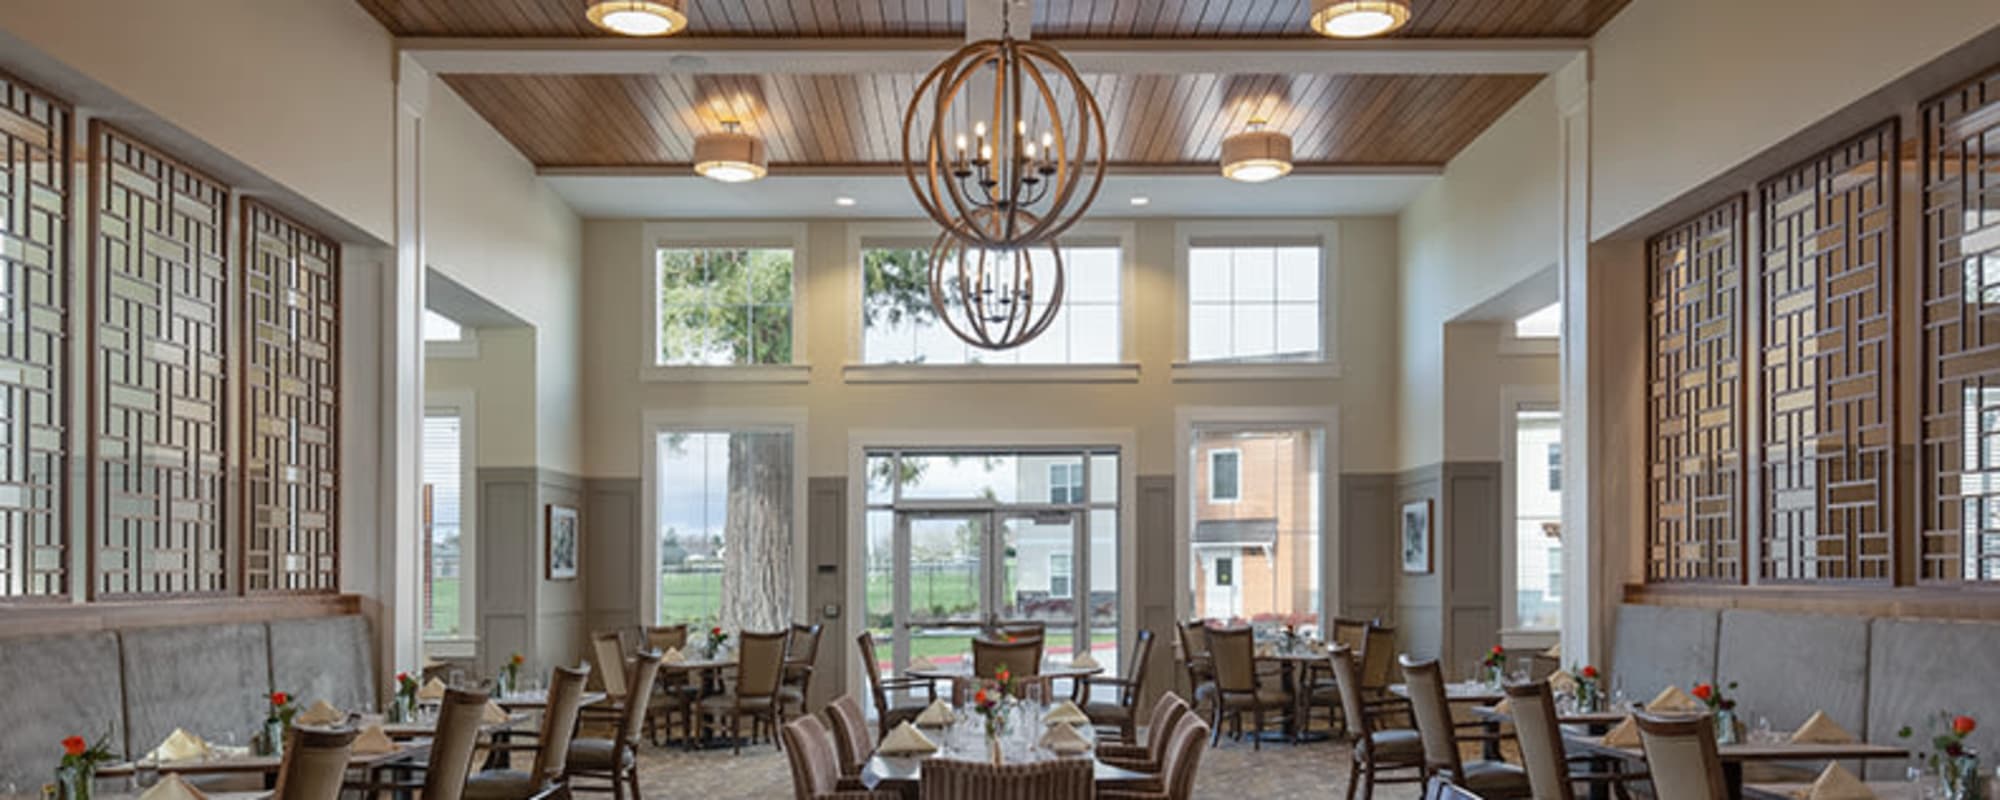 Beautifully well light and elegant common dinning area with modern chandeliers at upscale senior living facility at The Springs at Sherwood in Sherwood, Oregon